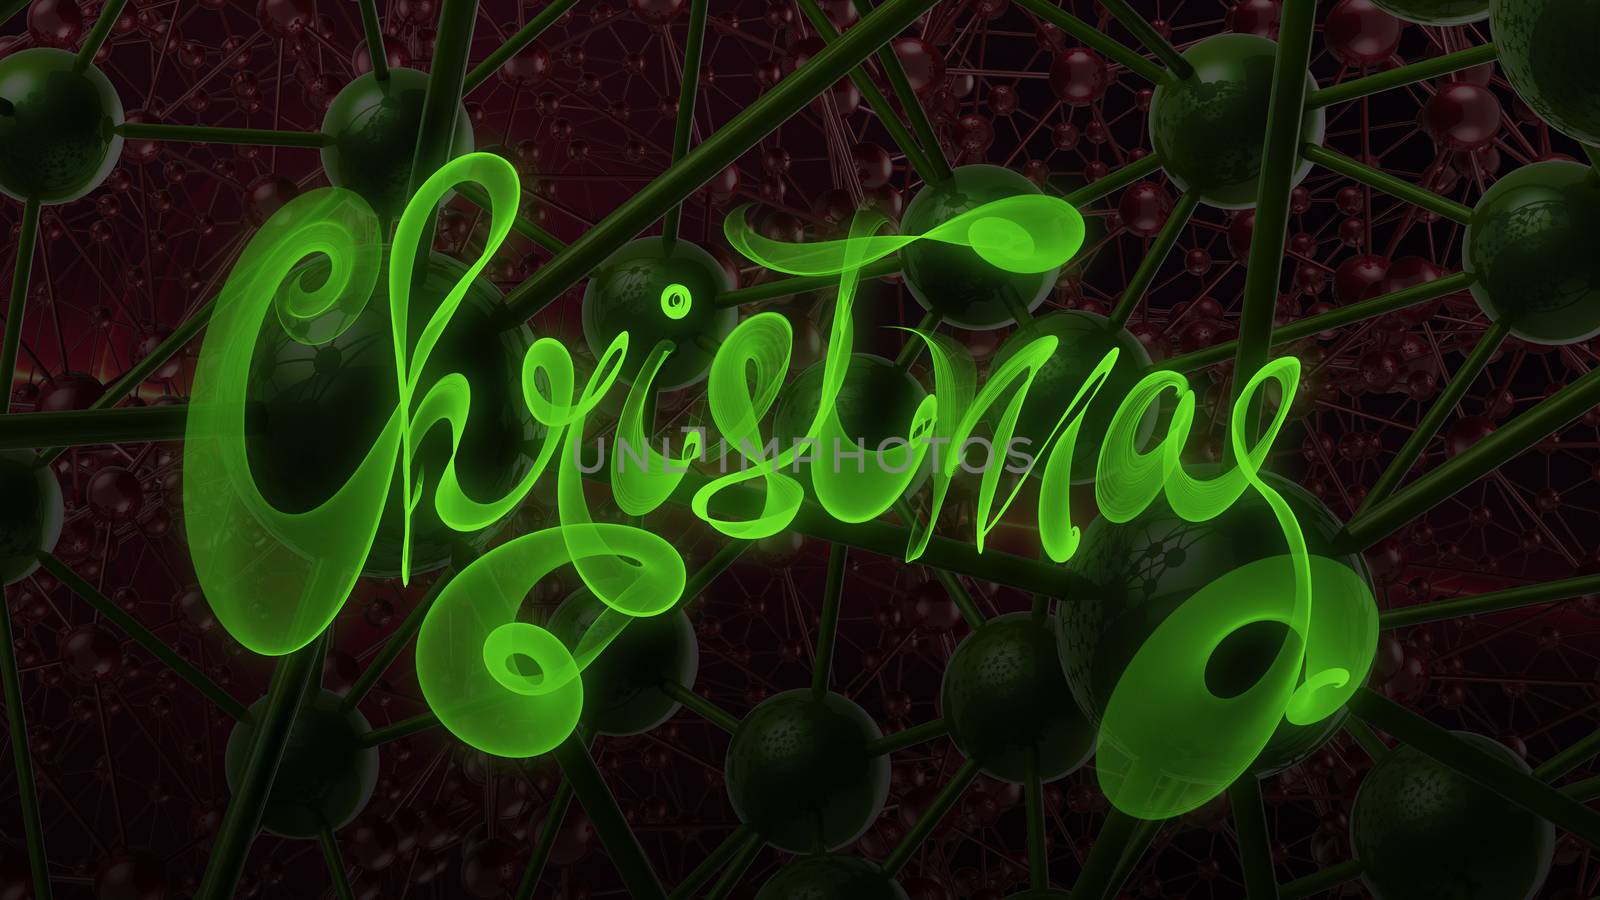 Christmas word lettering written with green fire flame or smoke on molecular hitech network background. 3d illustration.